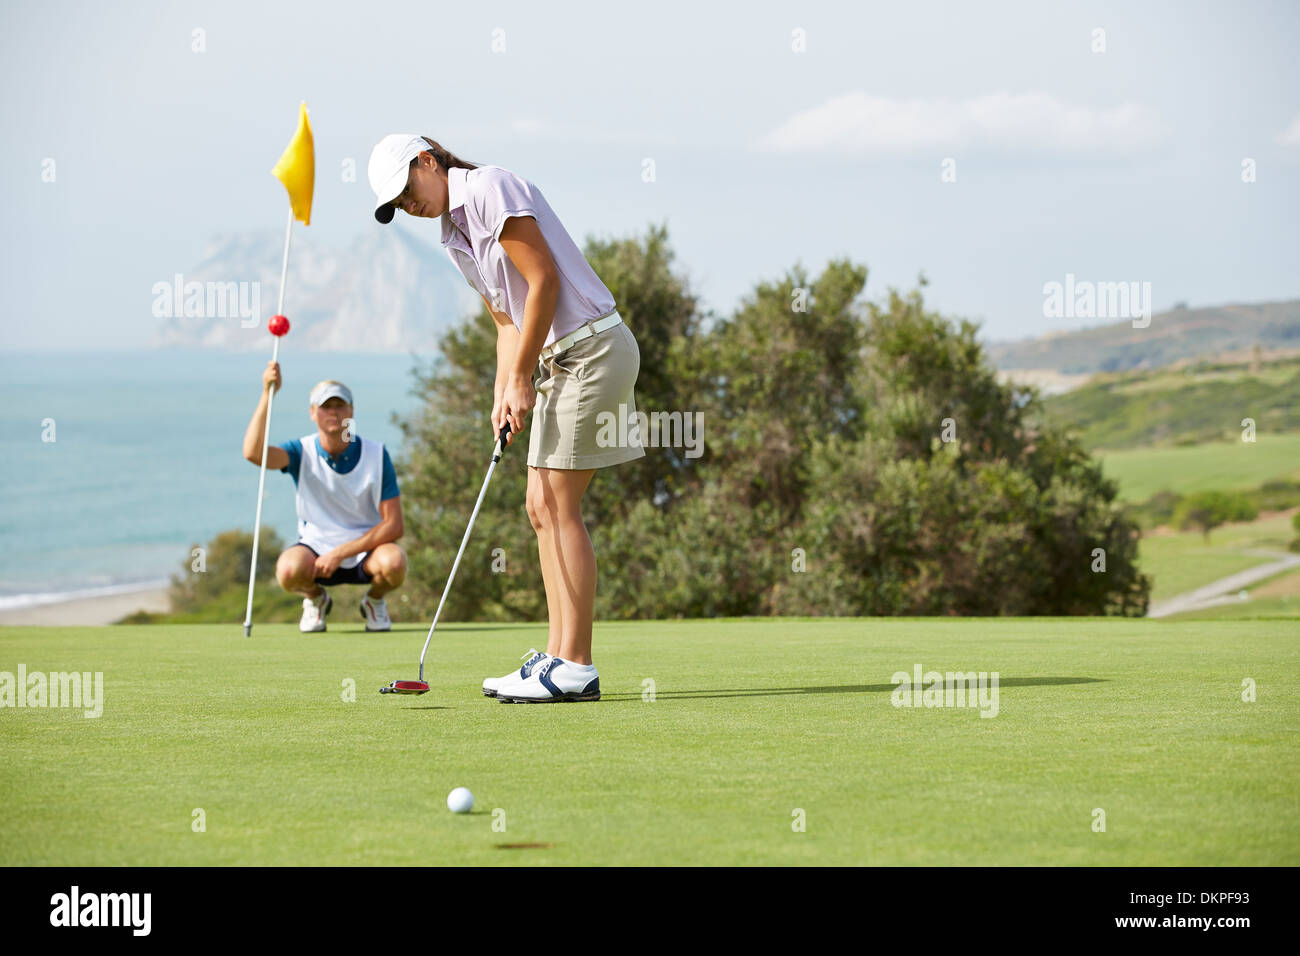 Caddy watching woman putt on golf course Stock Photo